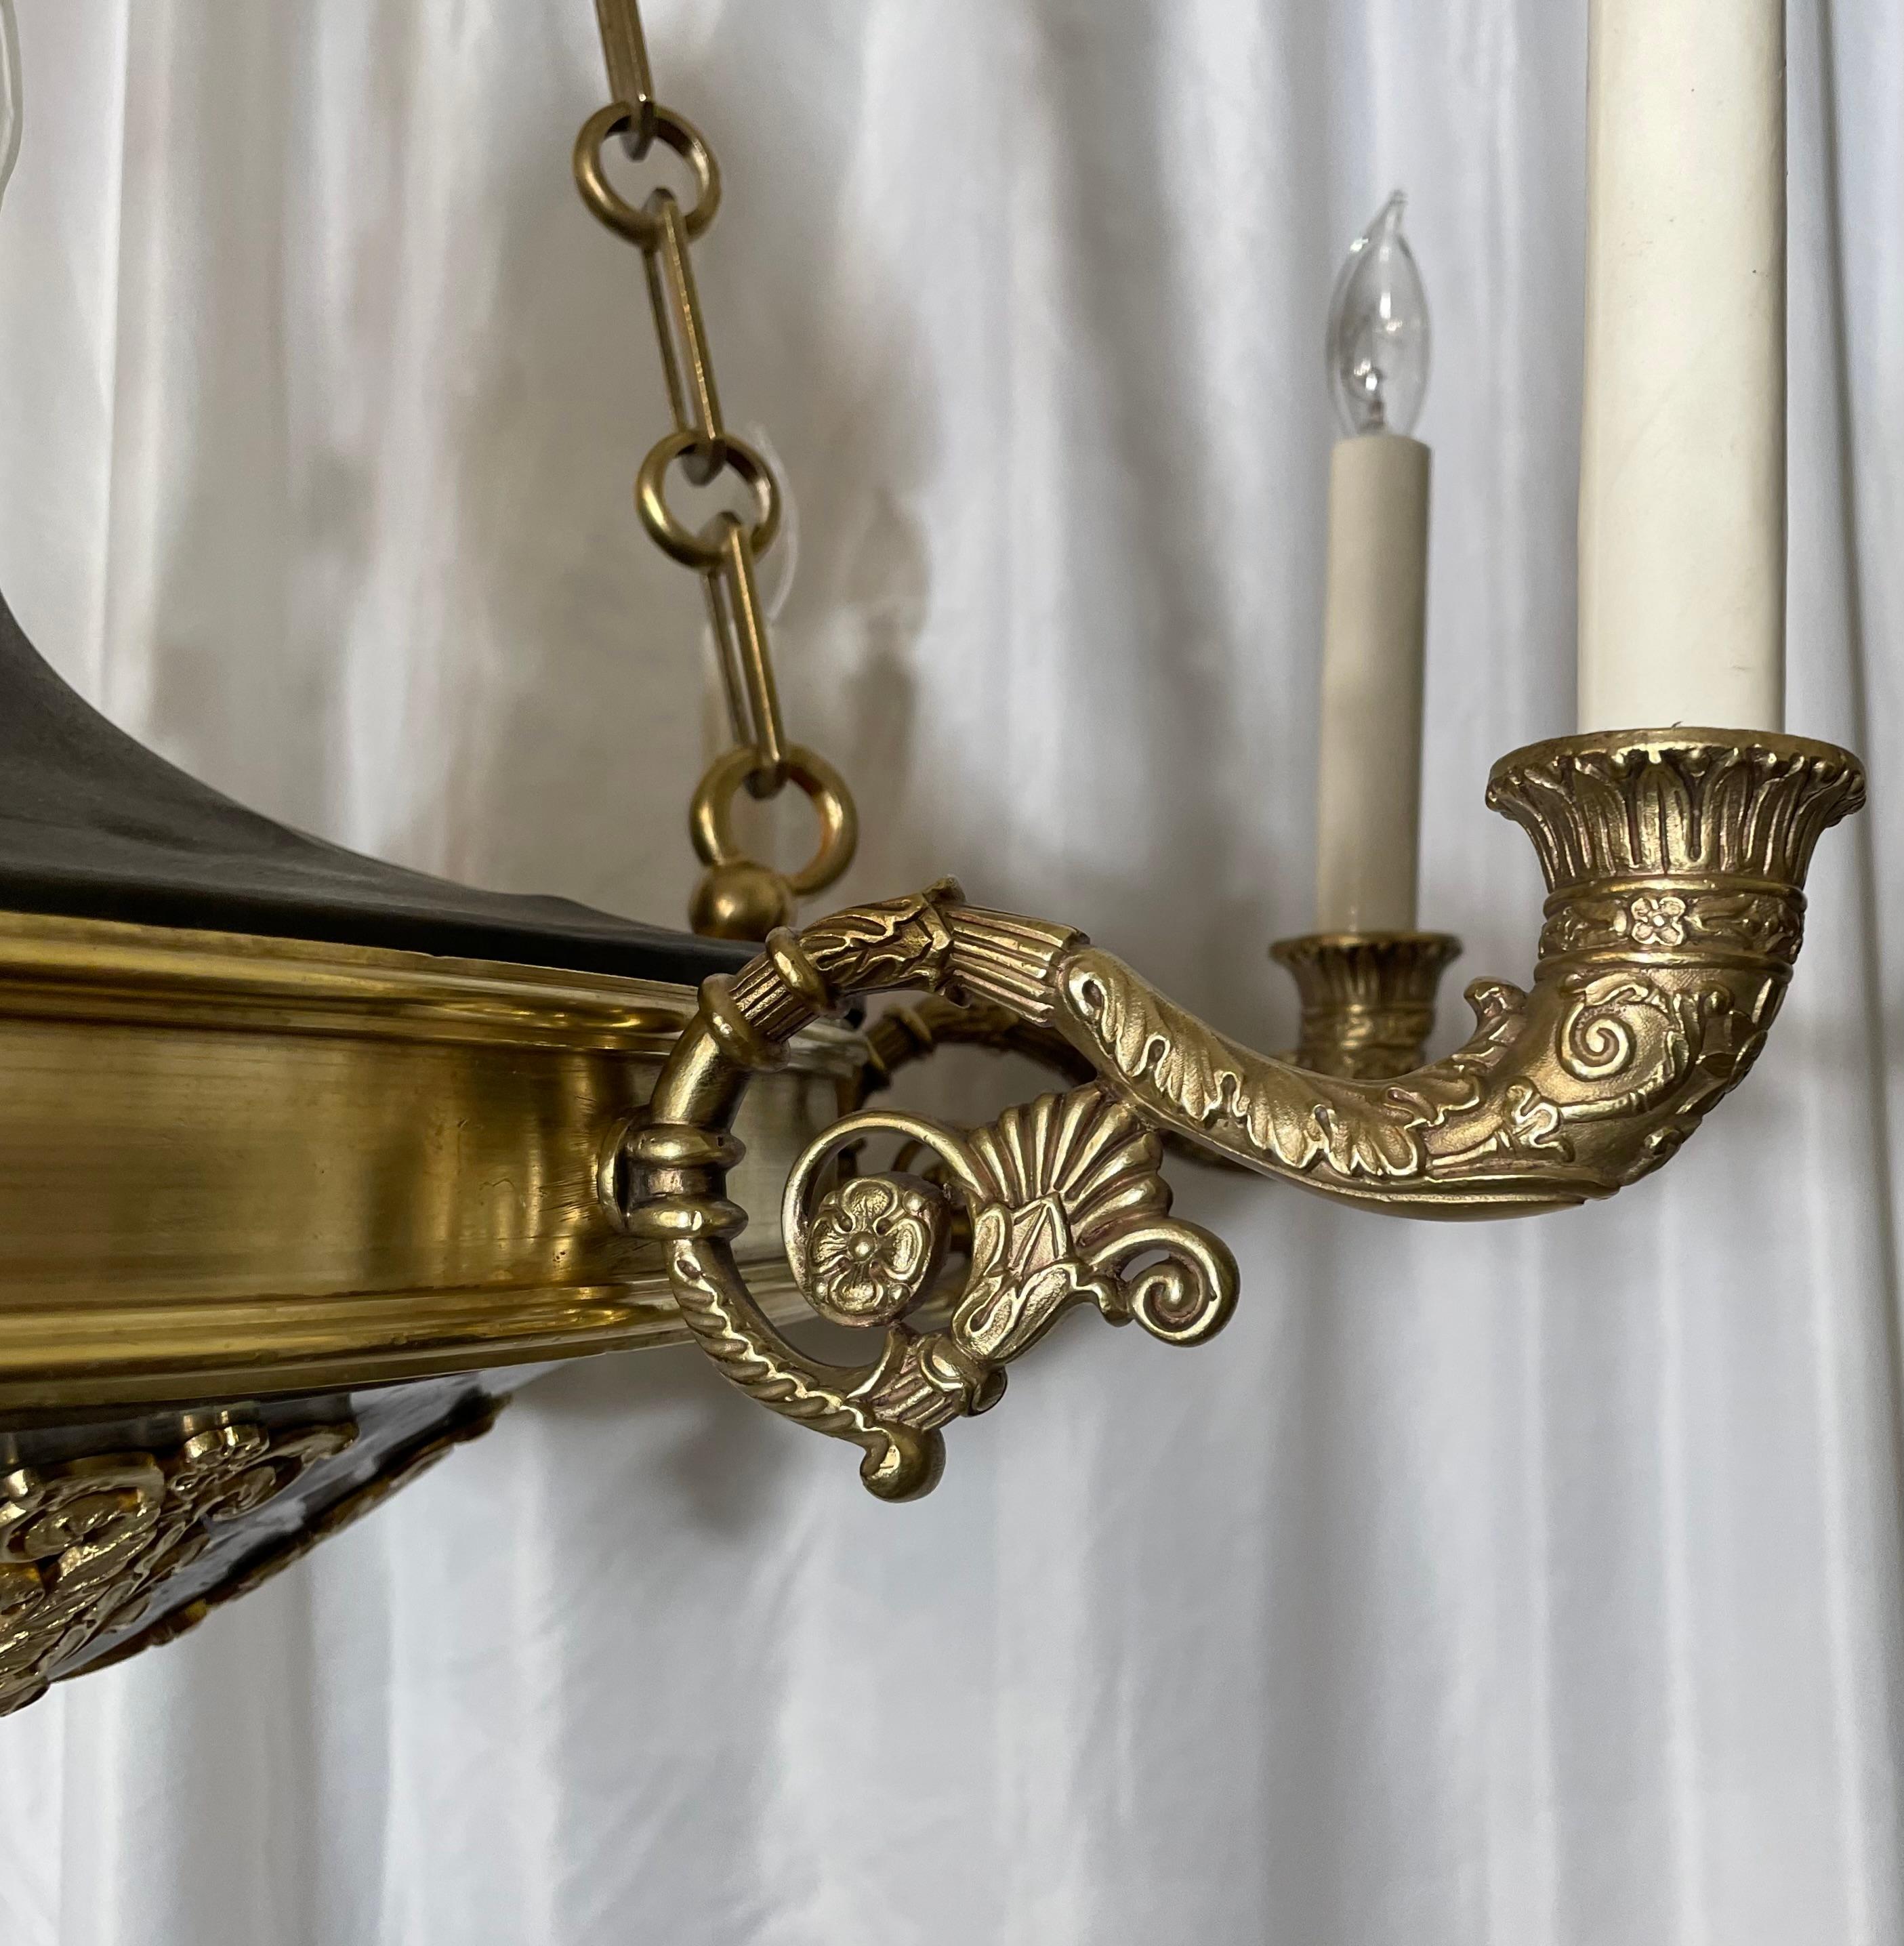 Antique French Empire Chandelier circa 1900 In Good Condition For Sale In New Orleans, LA